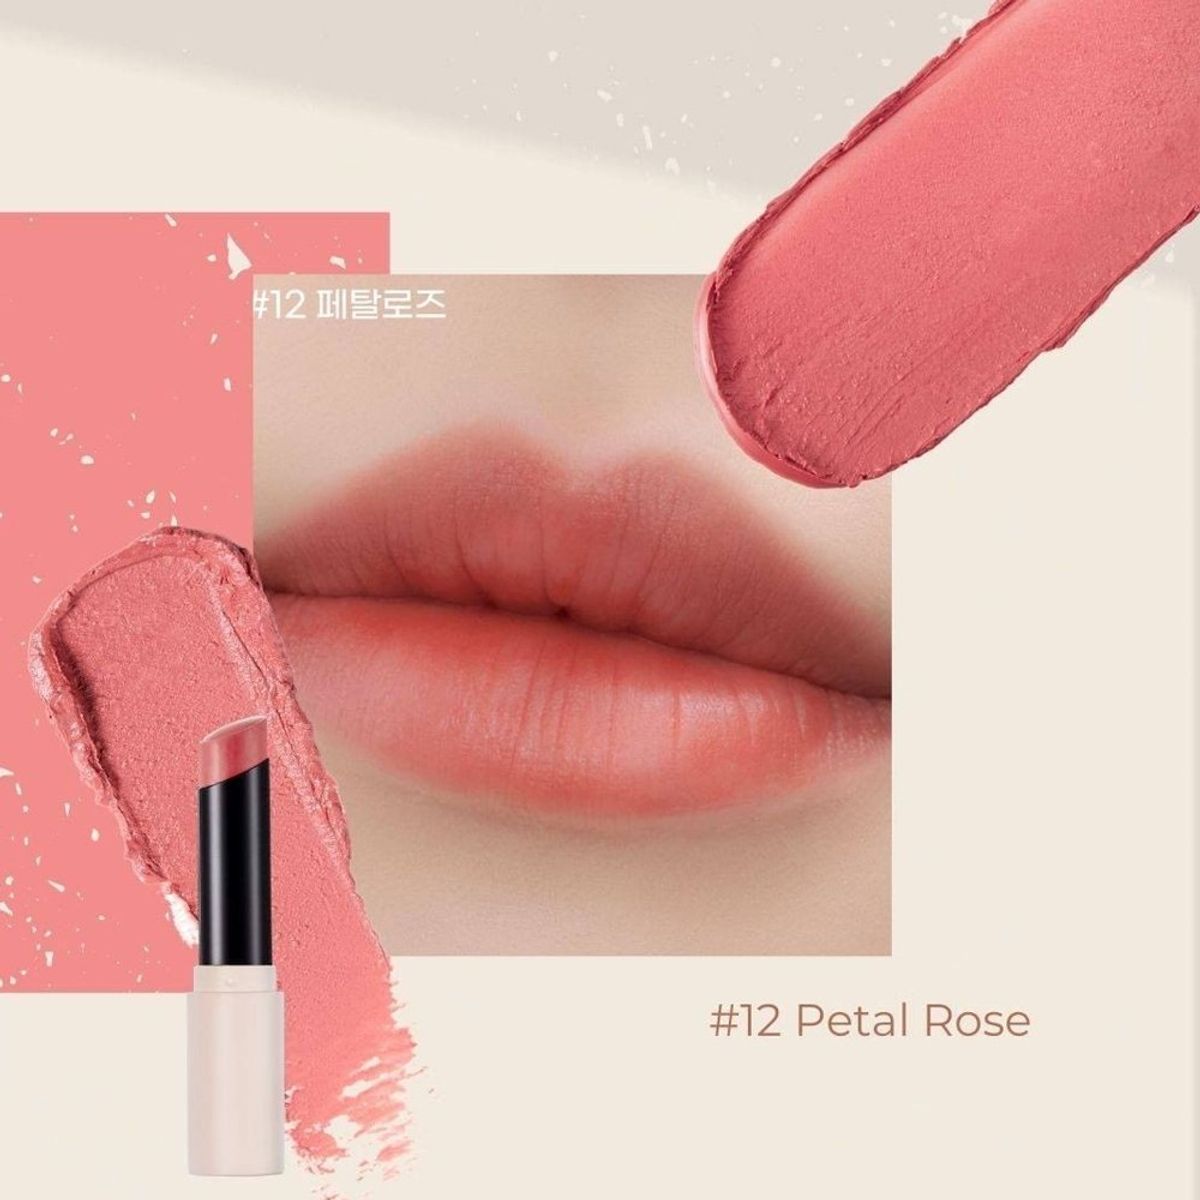 gift-fmgt-son-thoi-li-min-fmgt-thefaceshop-rosy-nude-ink-sheer-matte-lipstick-12-petal-rose-1